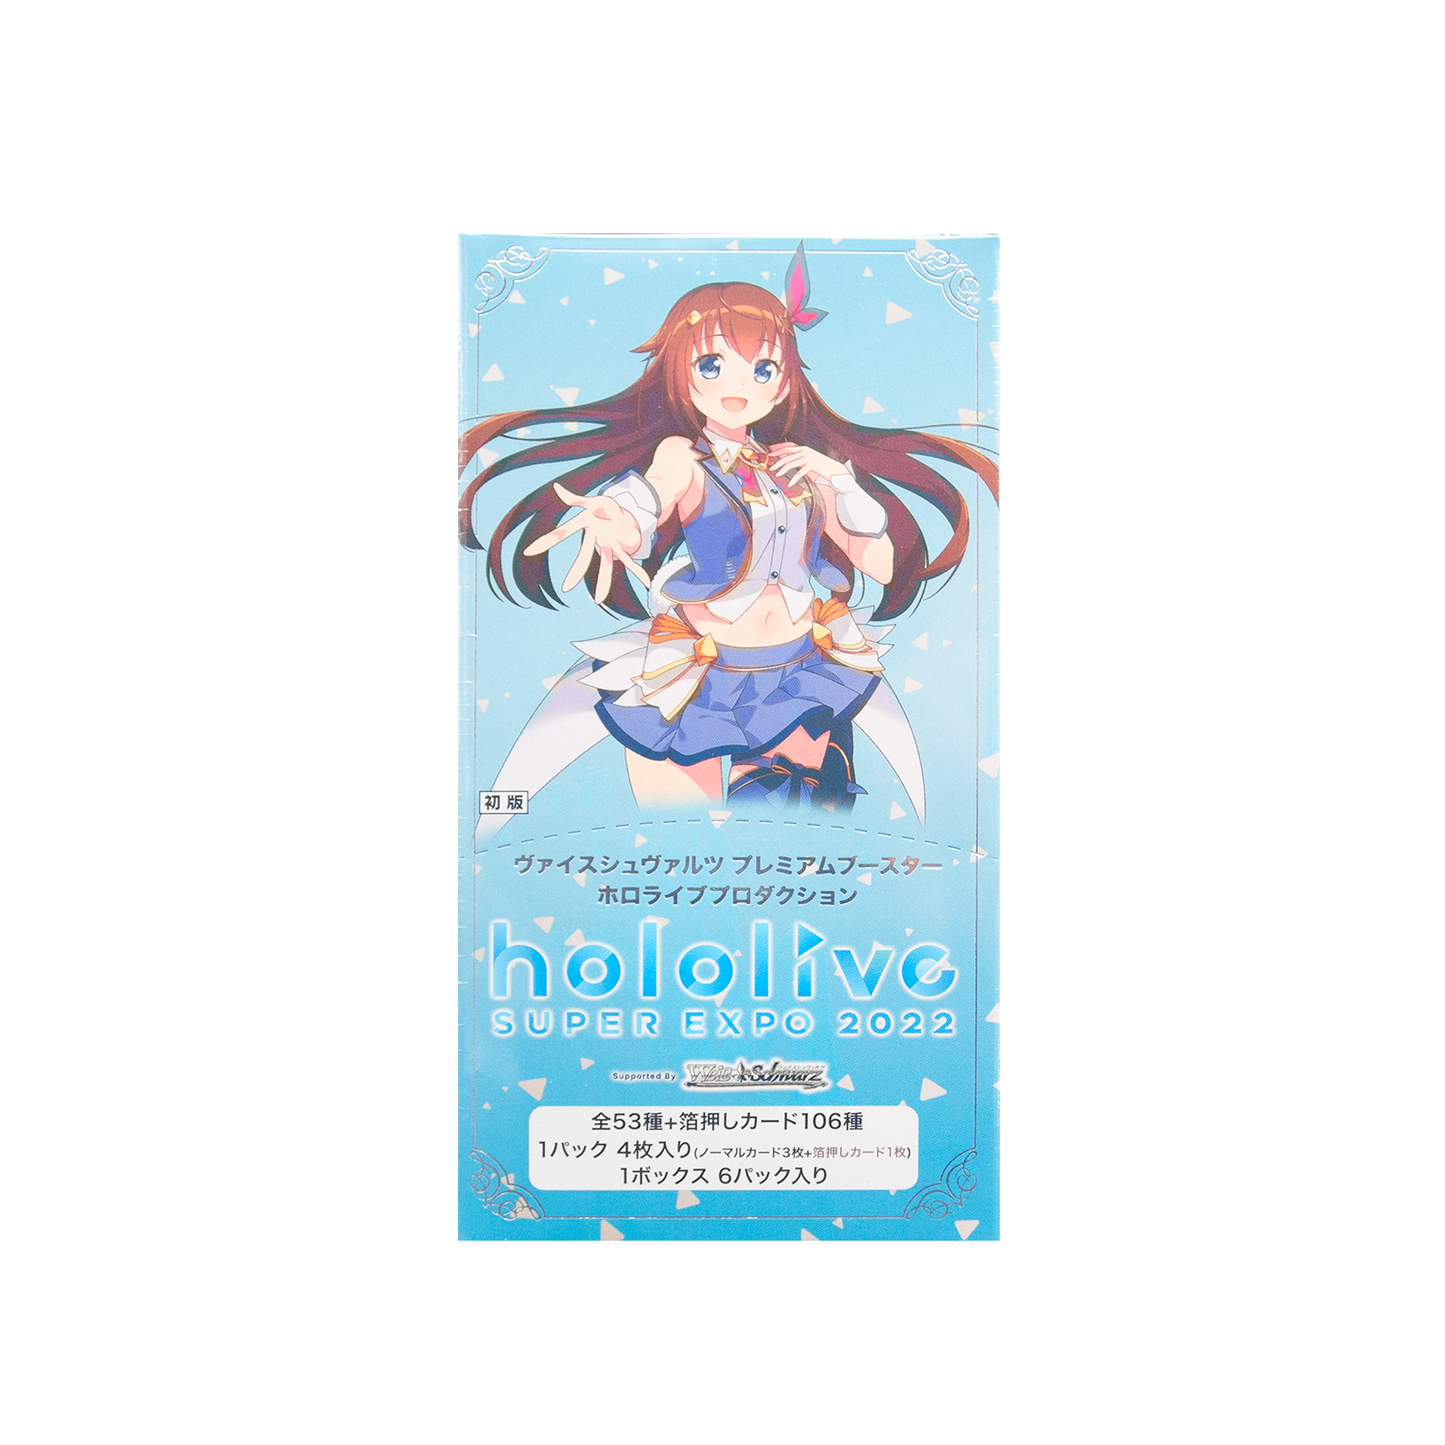 Weiss Schwarz: Premium Booster Hololive Production Super Expo2022 (Japanese)